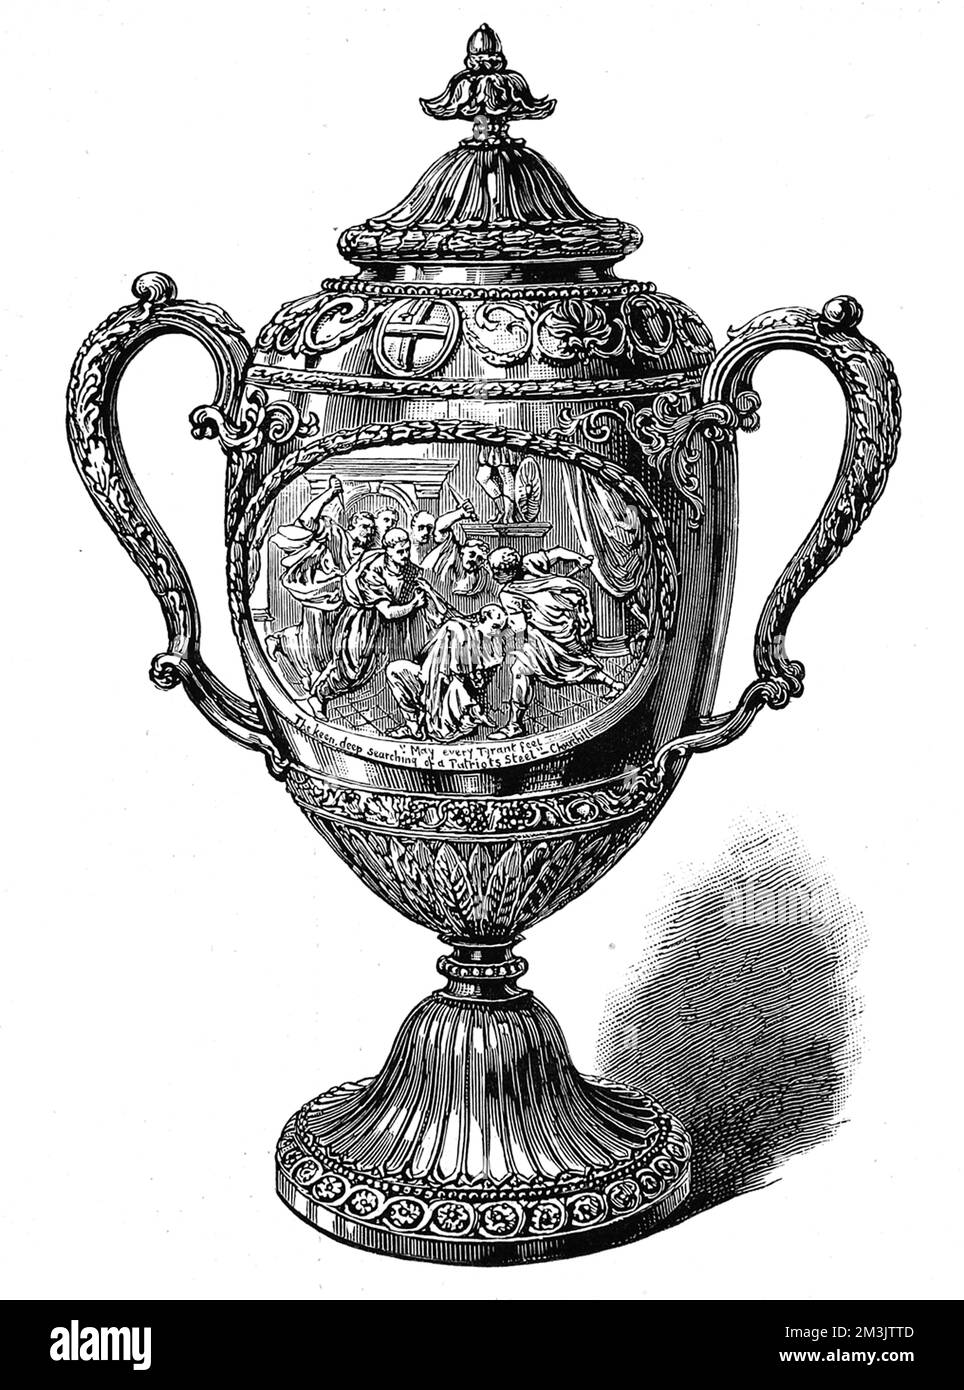 Engraving of a Loving Cup presented to John Wilkes, MP and Lord Mayor of London, by the City Corporation on 24th January 1772 'in commemoration of his valuable services in defending the freedom of the Press against a despotic Parliament'.     Date: 1881 Stock Photo